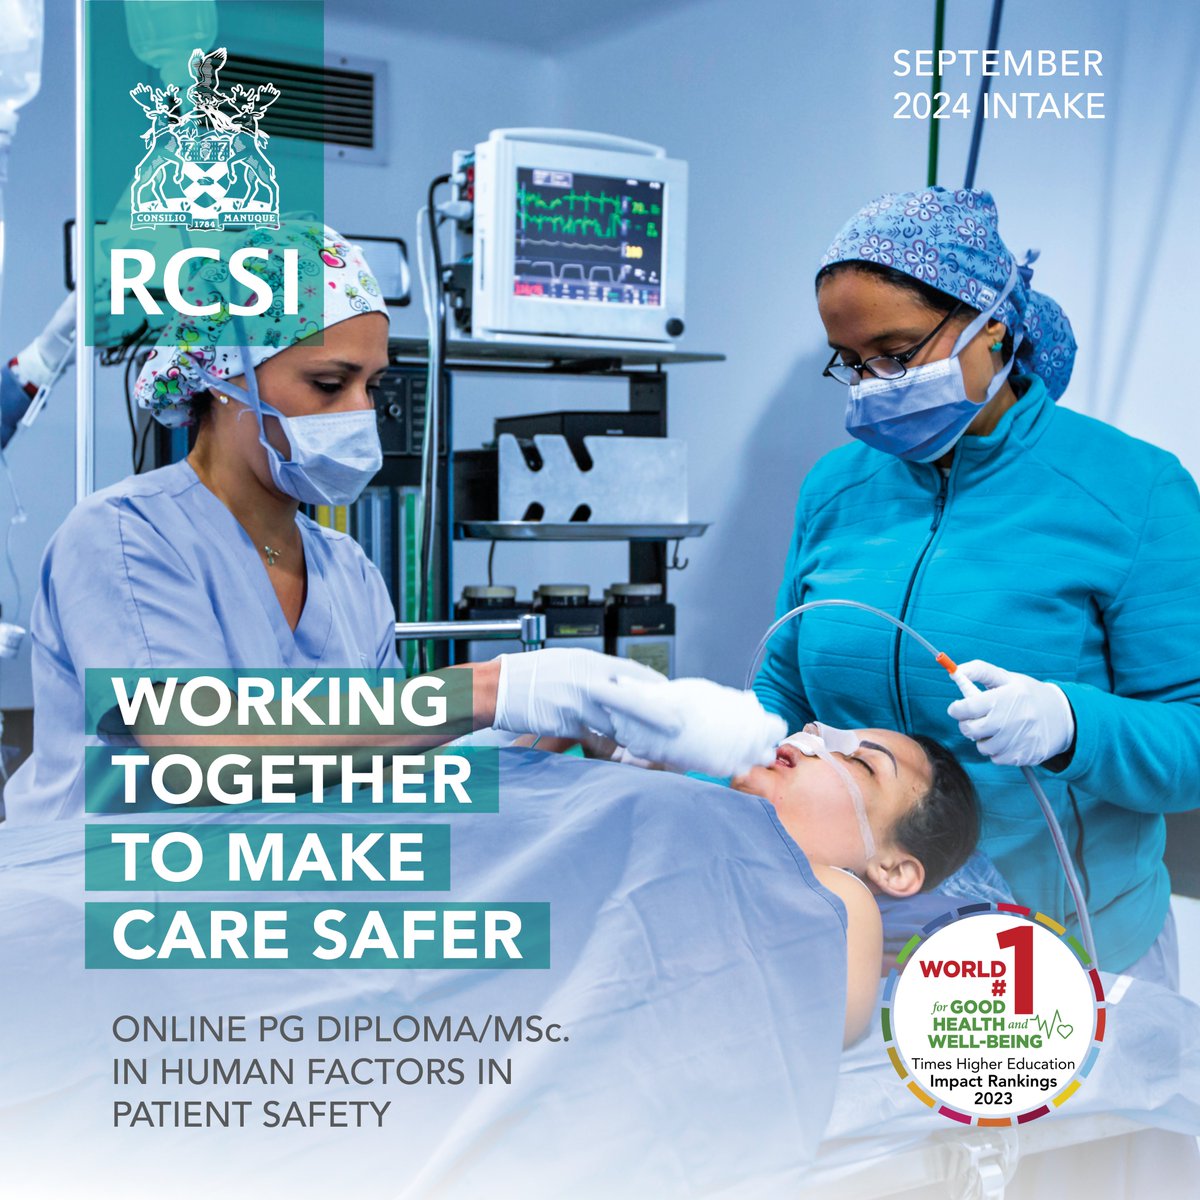 Applications for our inter-professional and online Human Factors in Patient Safety programme suited to busy healthcare professionals worldwide are now open. The programme is suitable for surgeons, physicians, anesthesiologists, emergency medicine doctors, obstetricians,…